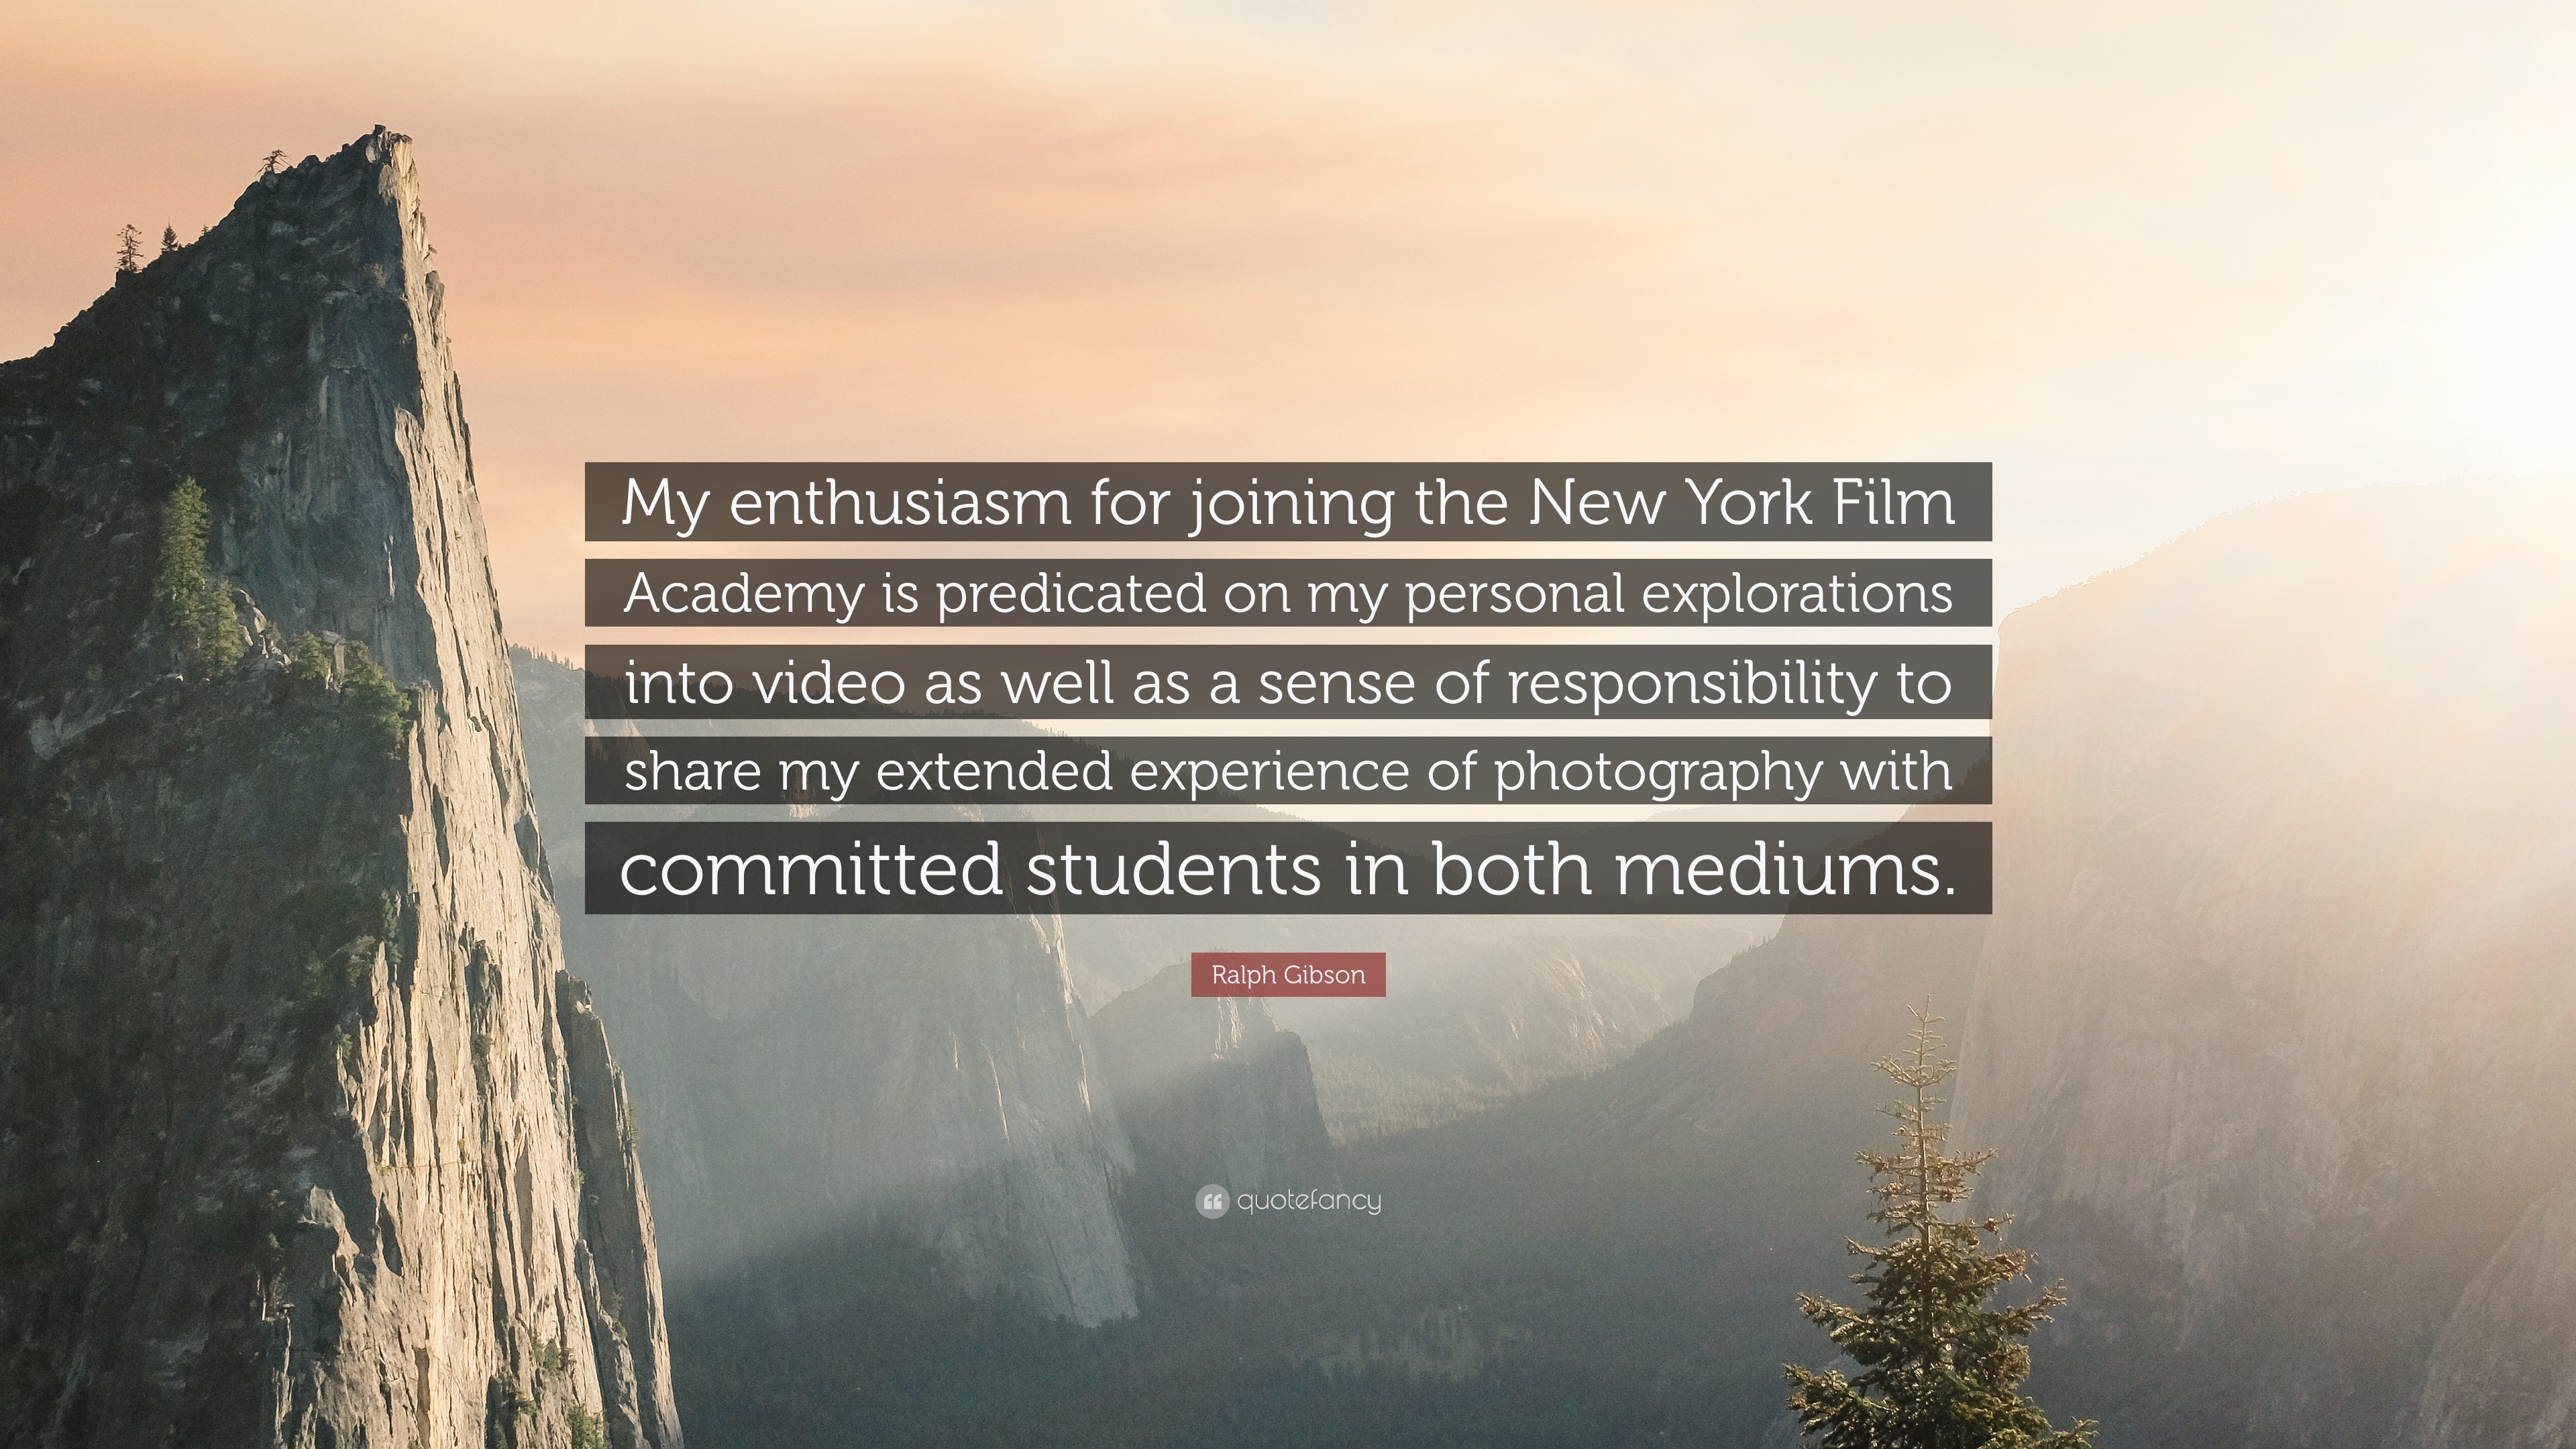 ralph gibson quote: “my enthusiasm for joining the new york film